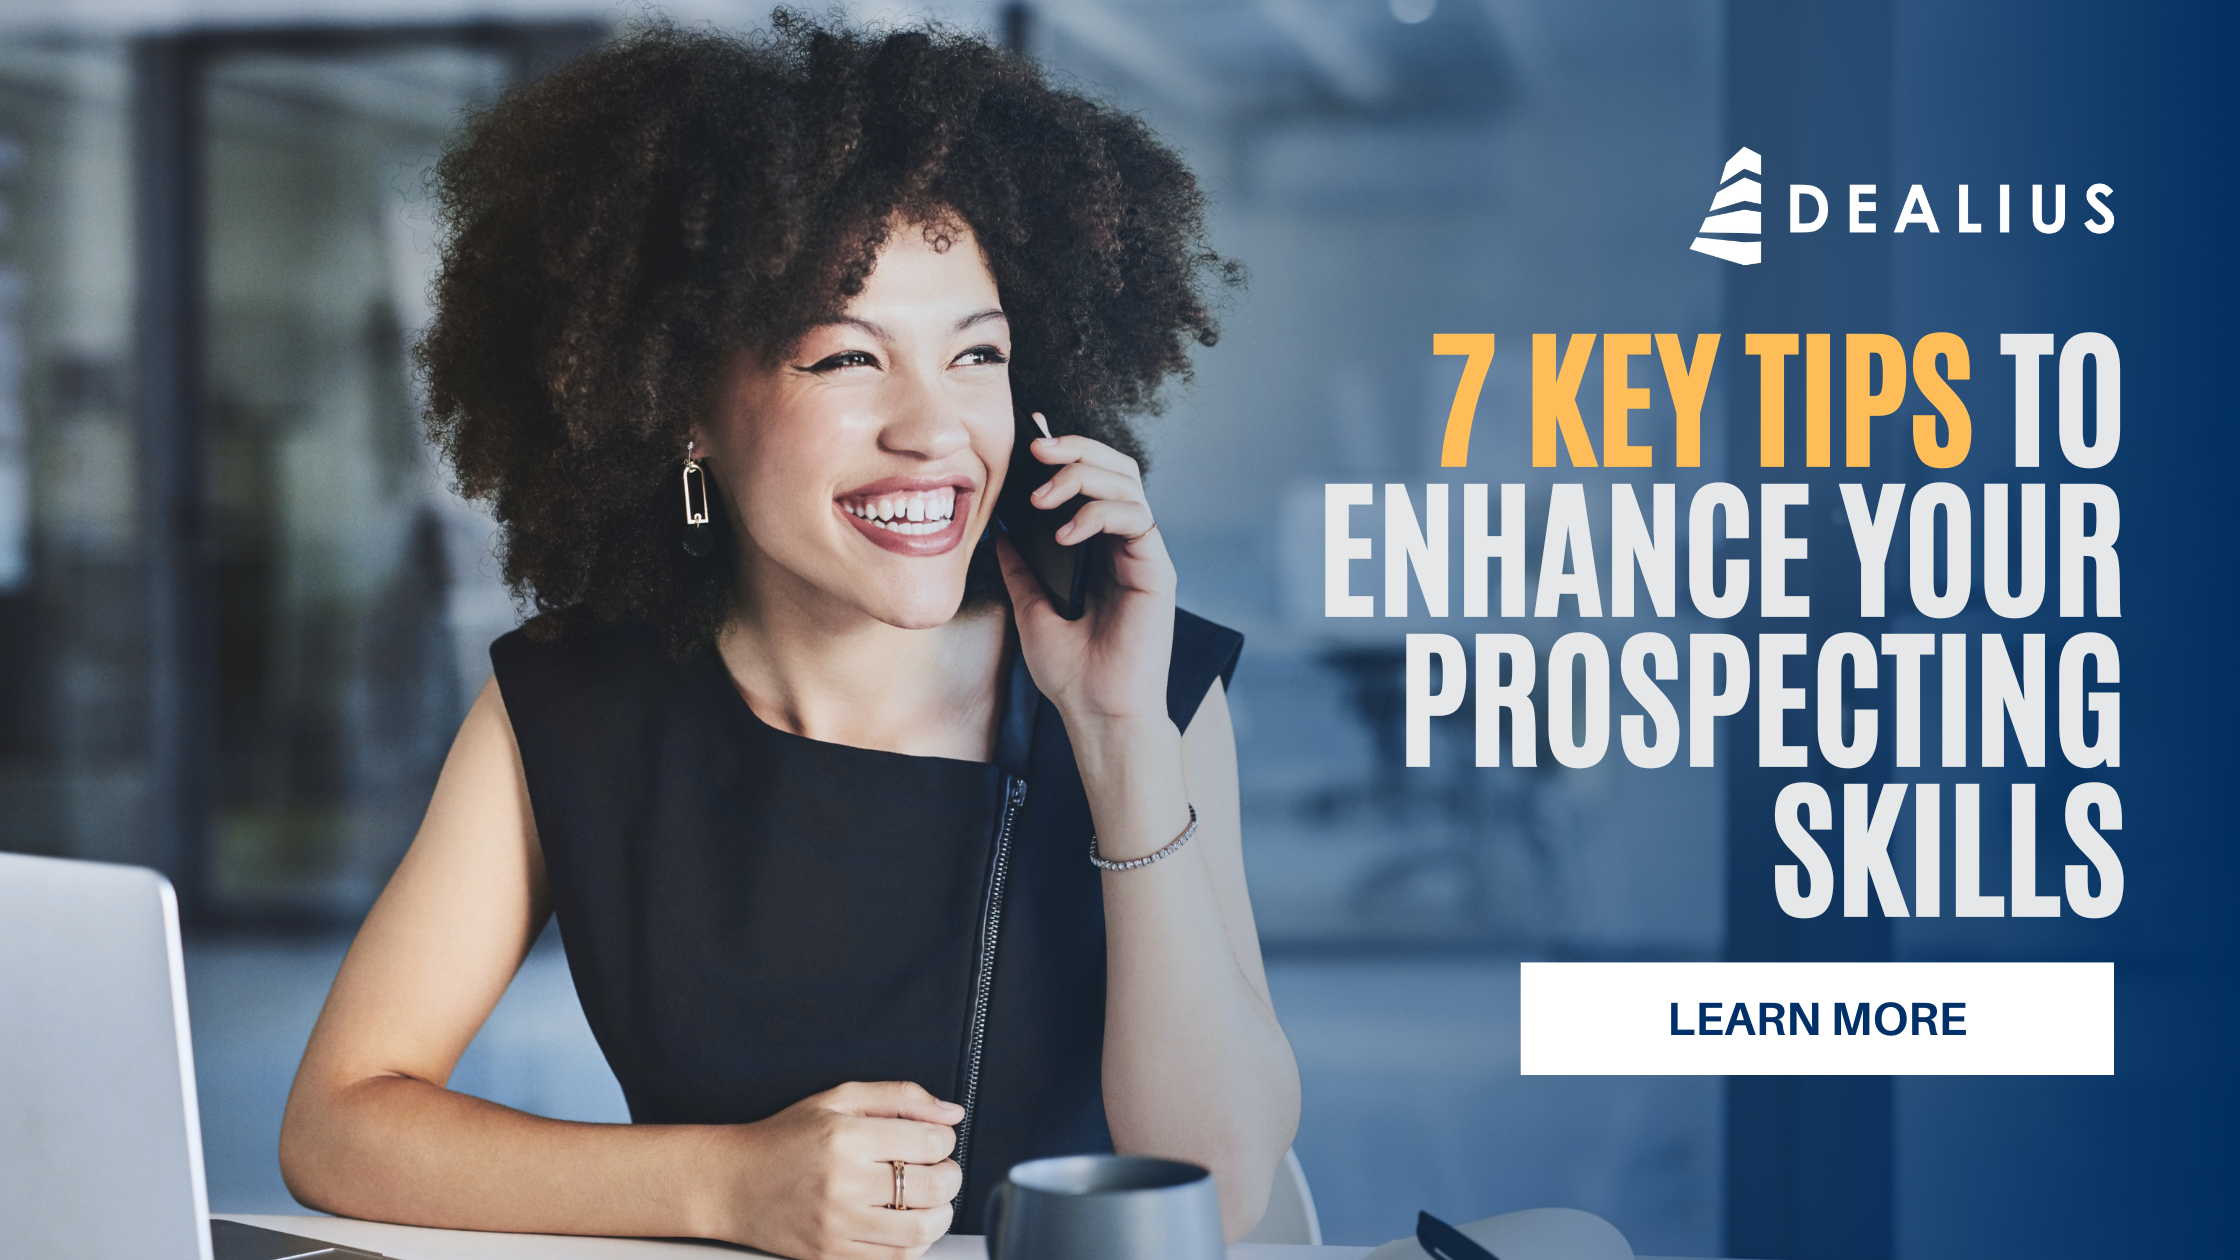 Blog banner with title "7 Key Tips to Enhance Your Prospecting Skills"